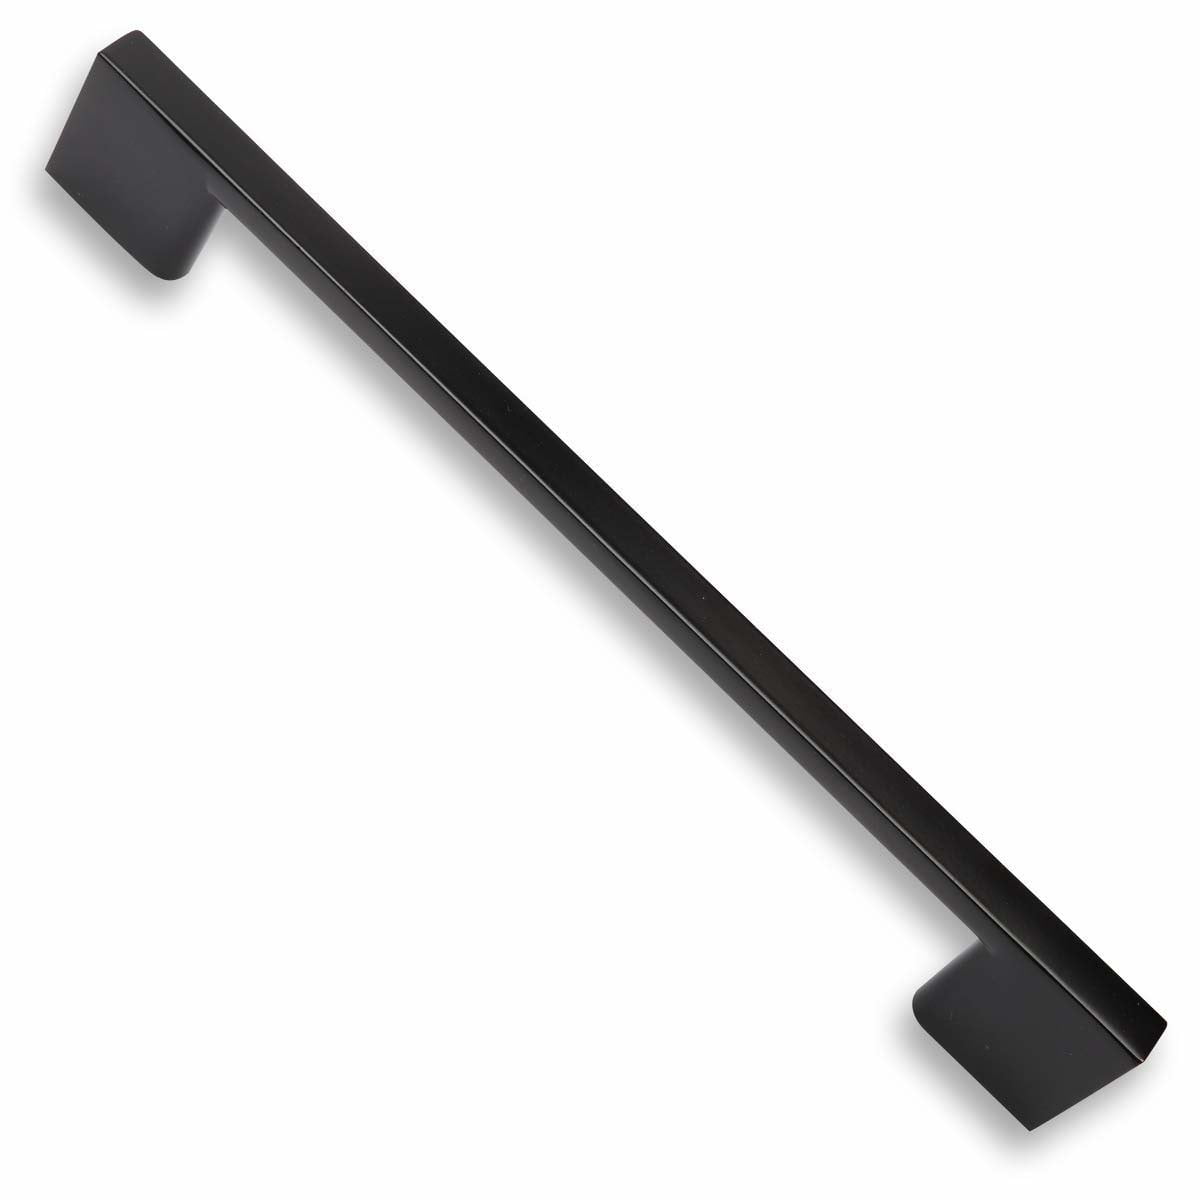 Southern Hills Black Cabinet Handles 5 Pack 6 1 4 Inch Screw